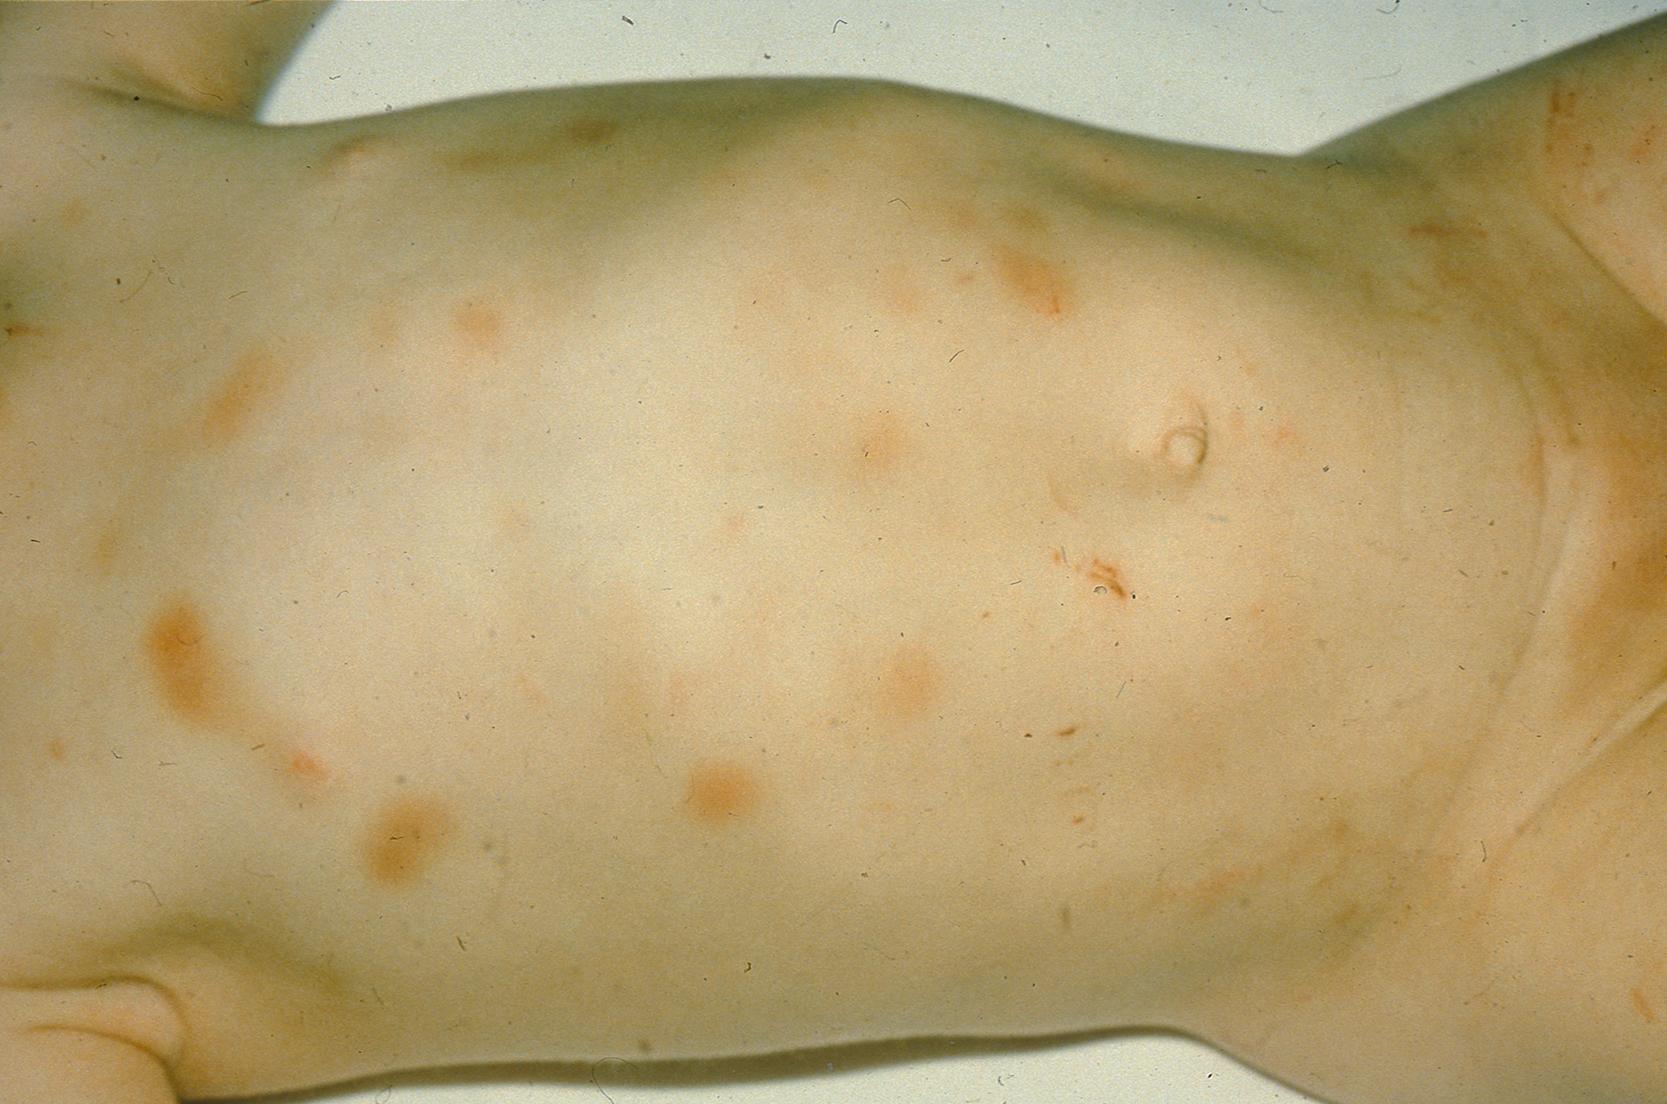 Figure 11.1, Abnormal bruising on anterior surface of chest and abdomen suggesting physical abuse.